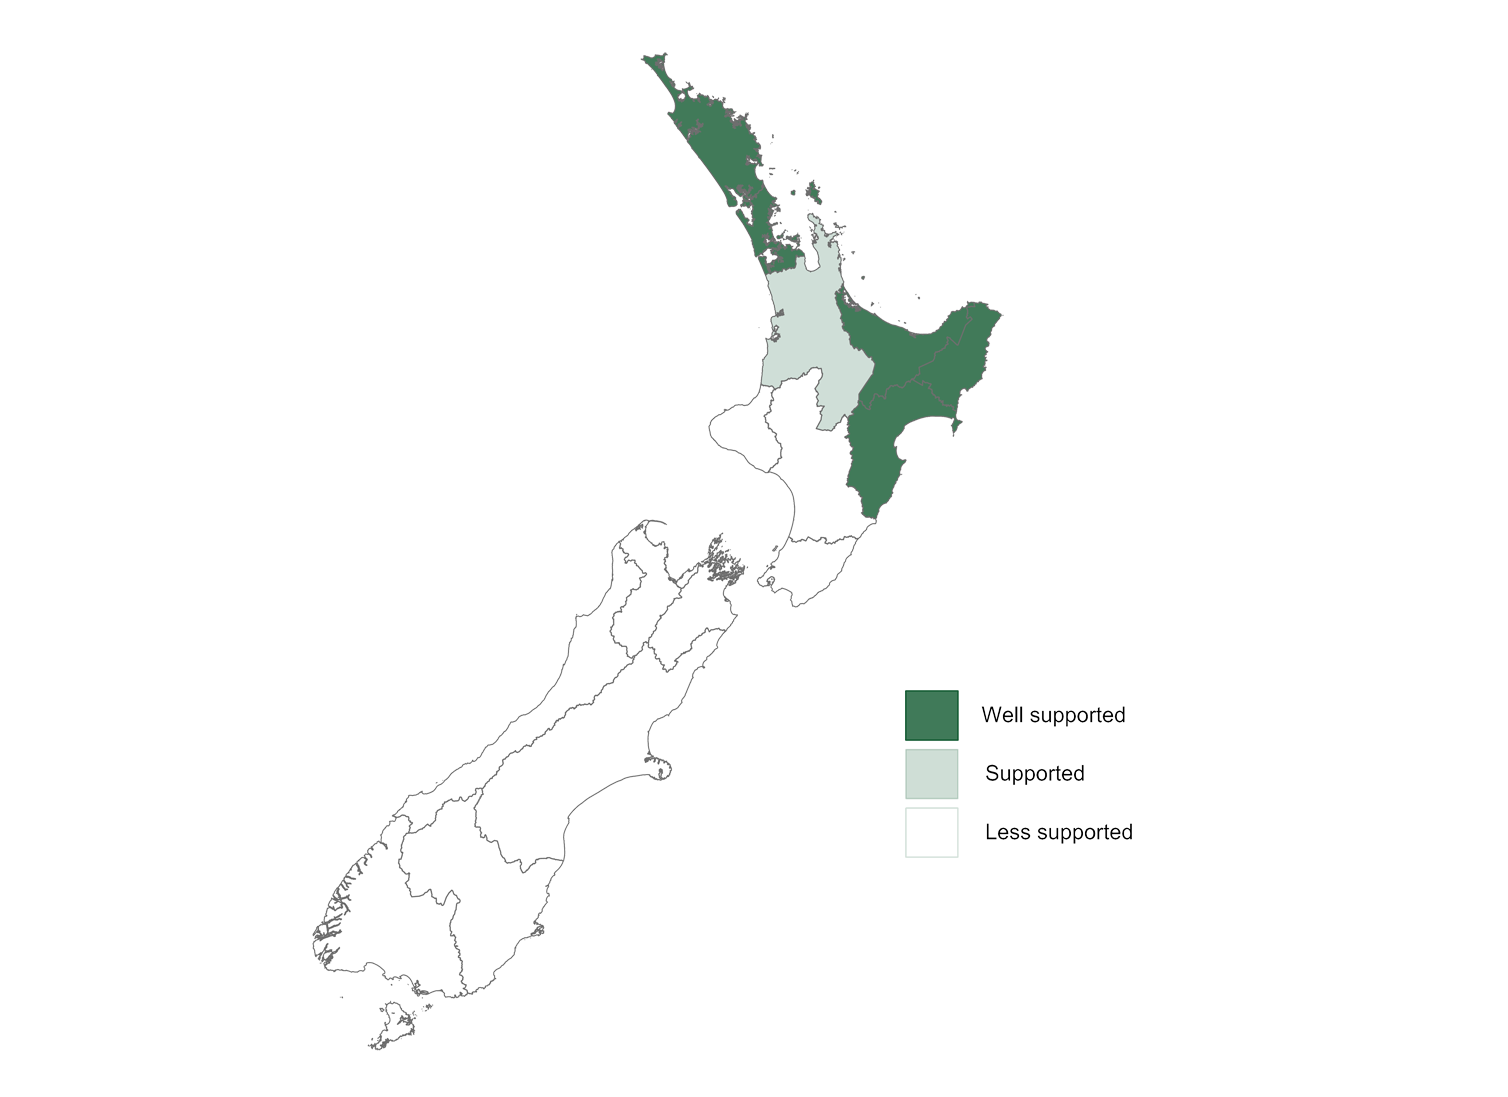 New Zealand map highlighting the best regions for commercial macadamia growing.